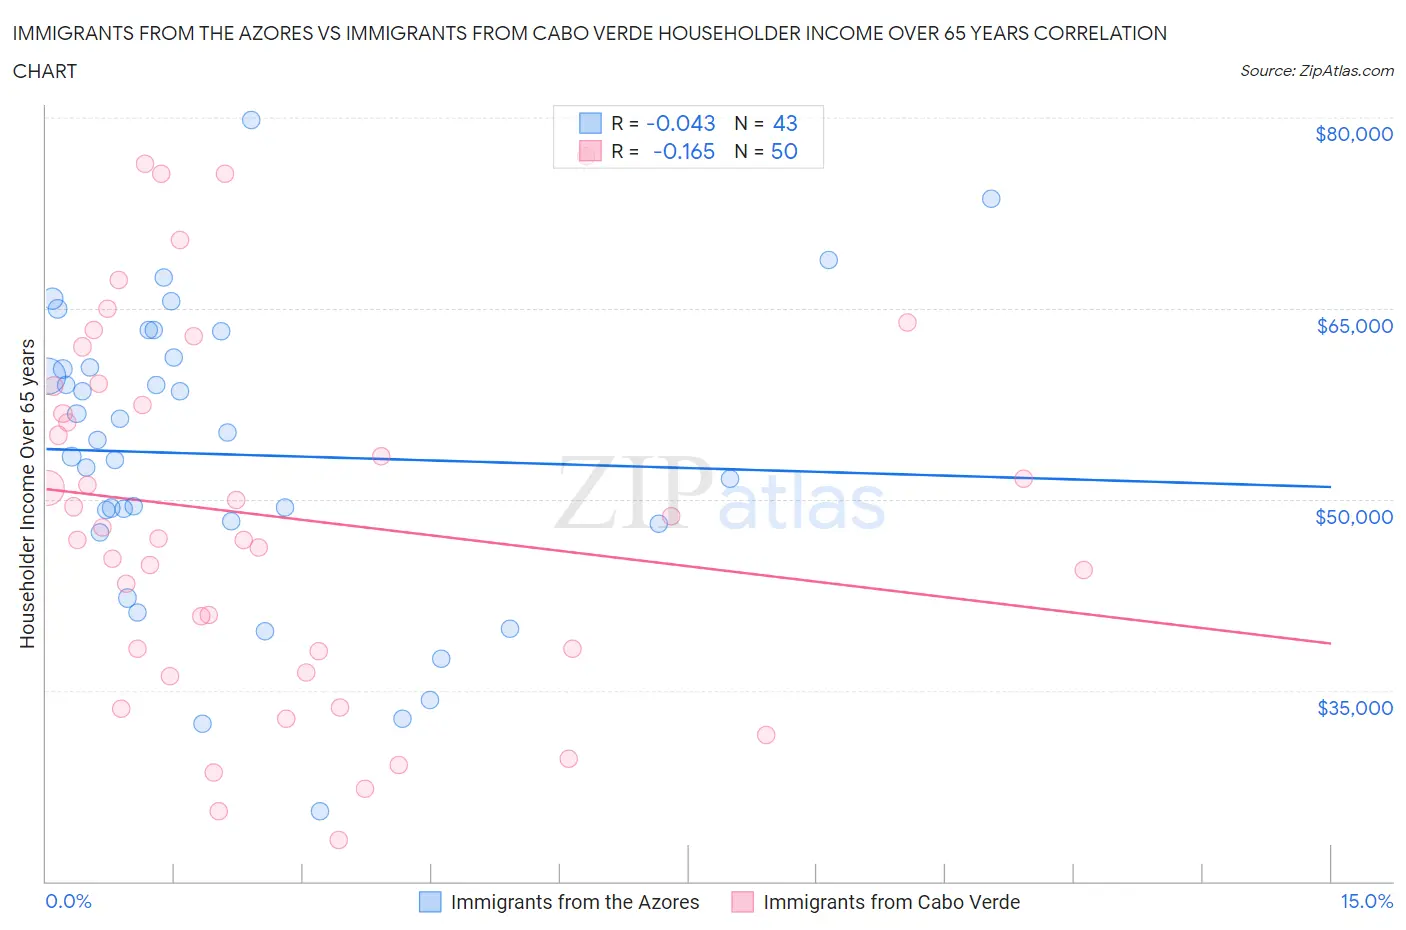 Immigrants from the Azores vs Immigrants from Cabo Verde Householder Income Over 65 years